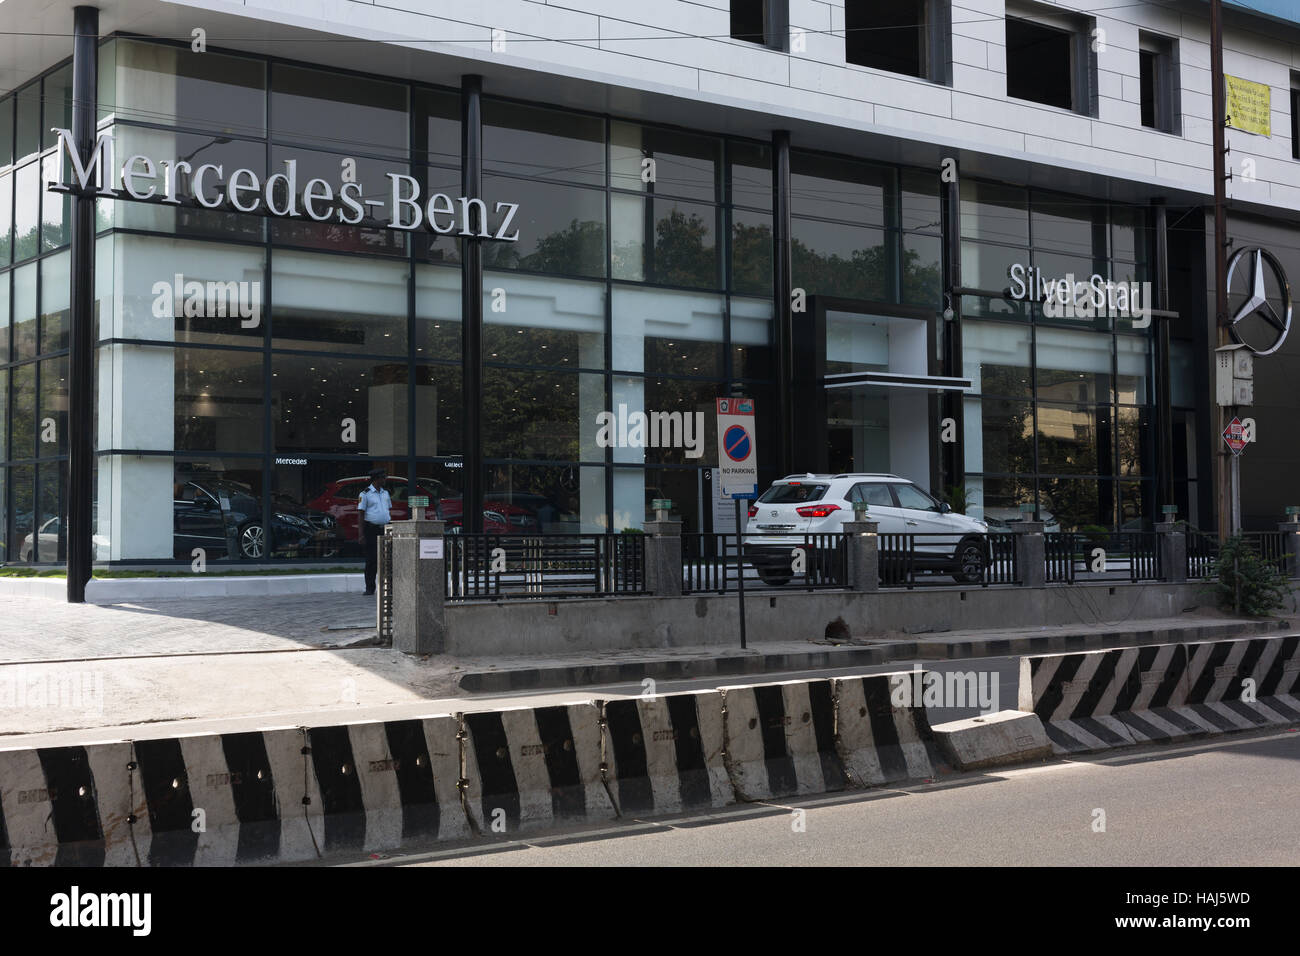 HYDERABAD, INDIA - DEC 01,2016  Mercedes-Benz India has opened its second dealership in Hyderabad. Stock Photo